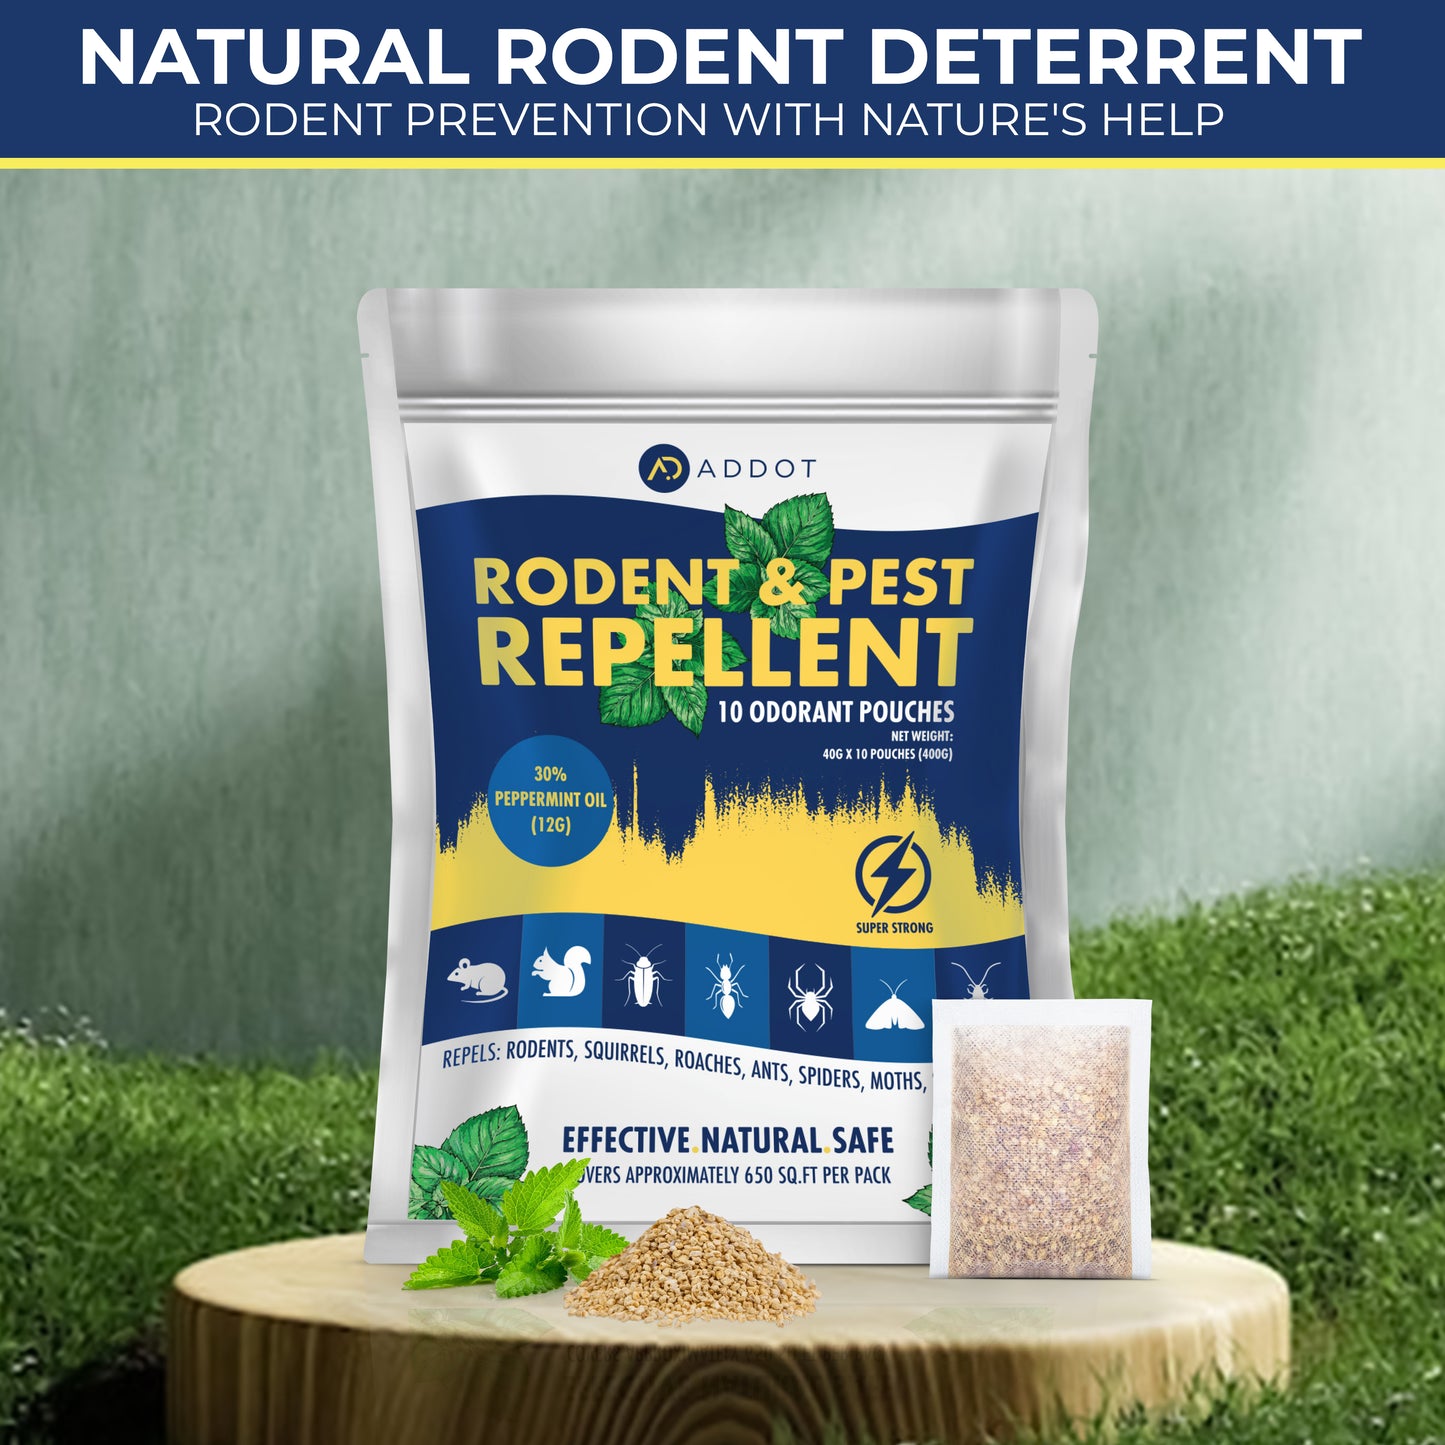 Rodent Mouse Repellent Indoor - Powerful Pest Repeller for Mice, Squirrels, Bats, and More - 10 Pack, 40g